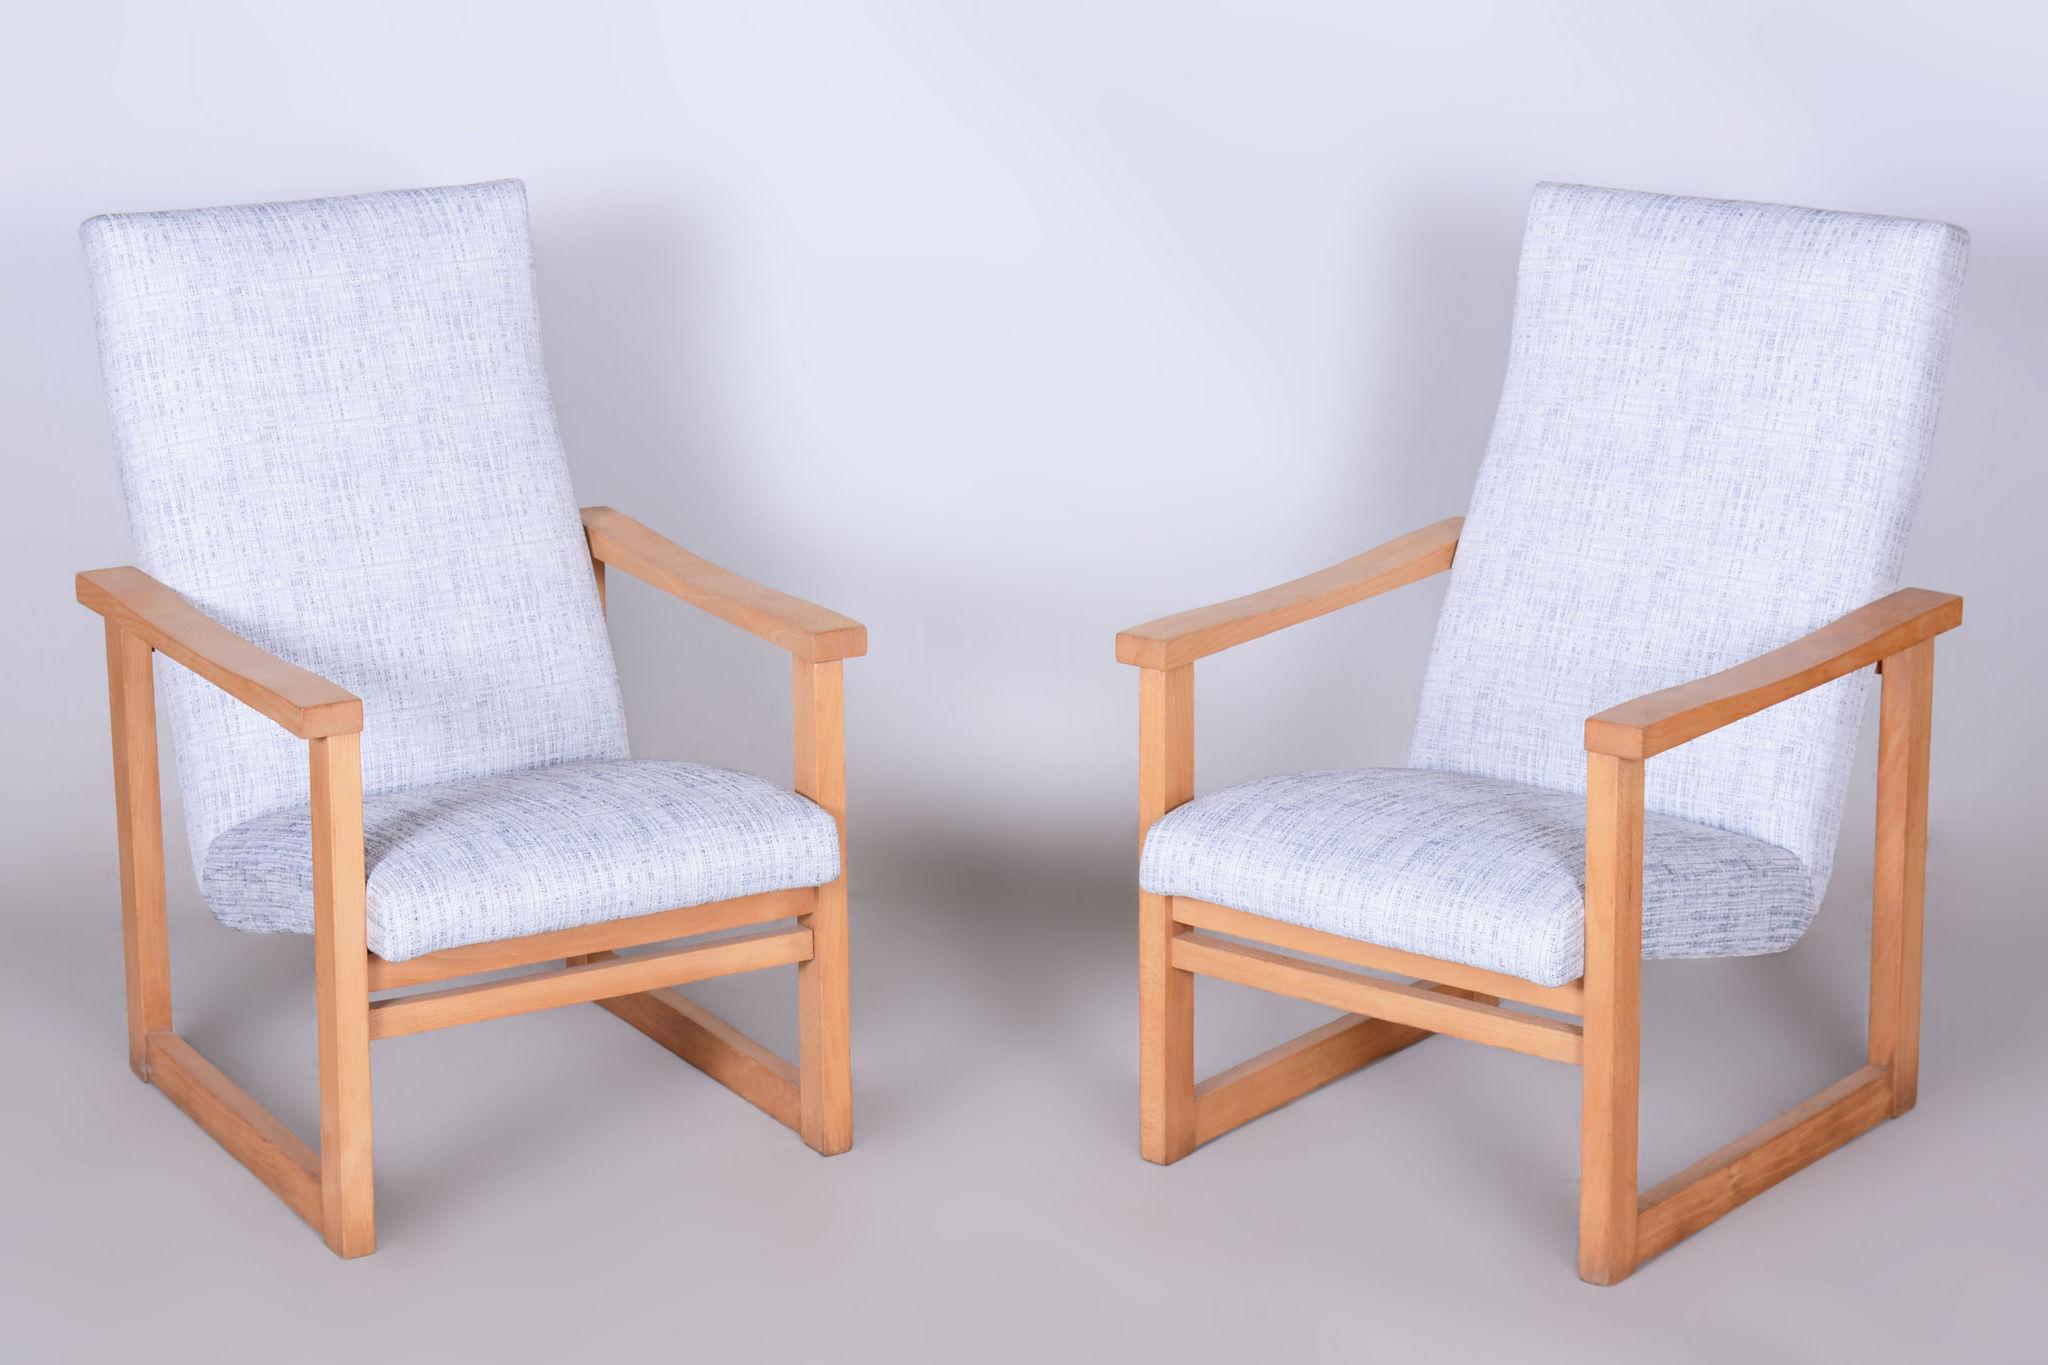 Pair of Original Mid-Century Beech Armchairs.

According to the original process, our professional refurbishing team in Czechia has restored and reupholstered the item. 

The surface of the wood is wrinkled by brushing for greater